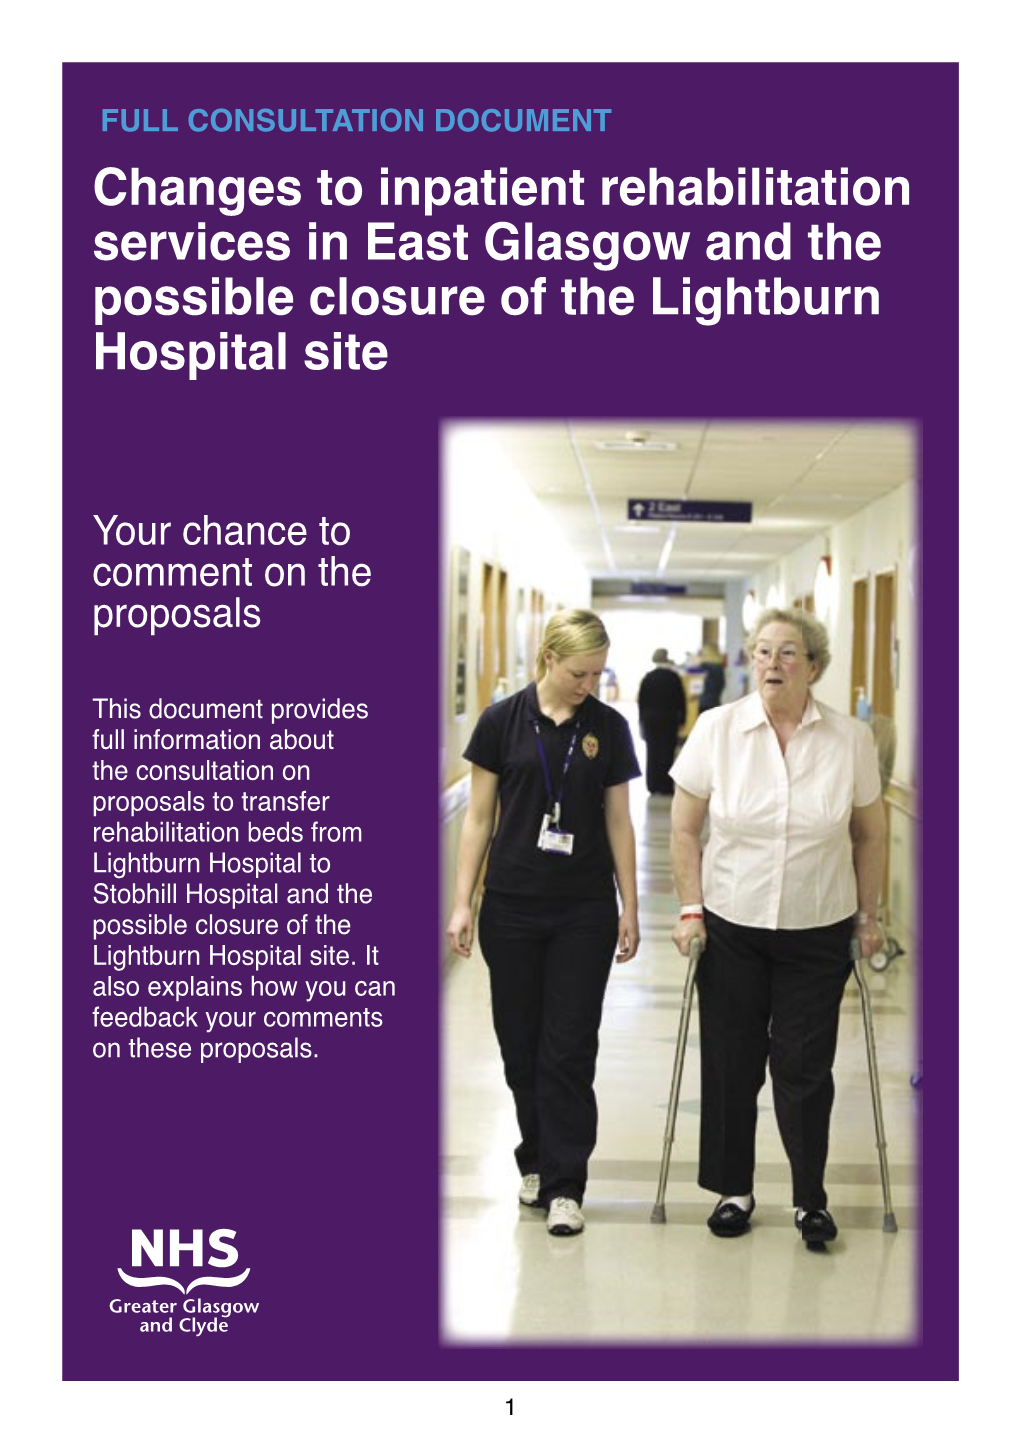 Changes to Inpatient Rehabilitation Services in East Glasgow and the Possible Closure of the Lightburn Hospital Site